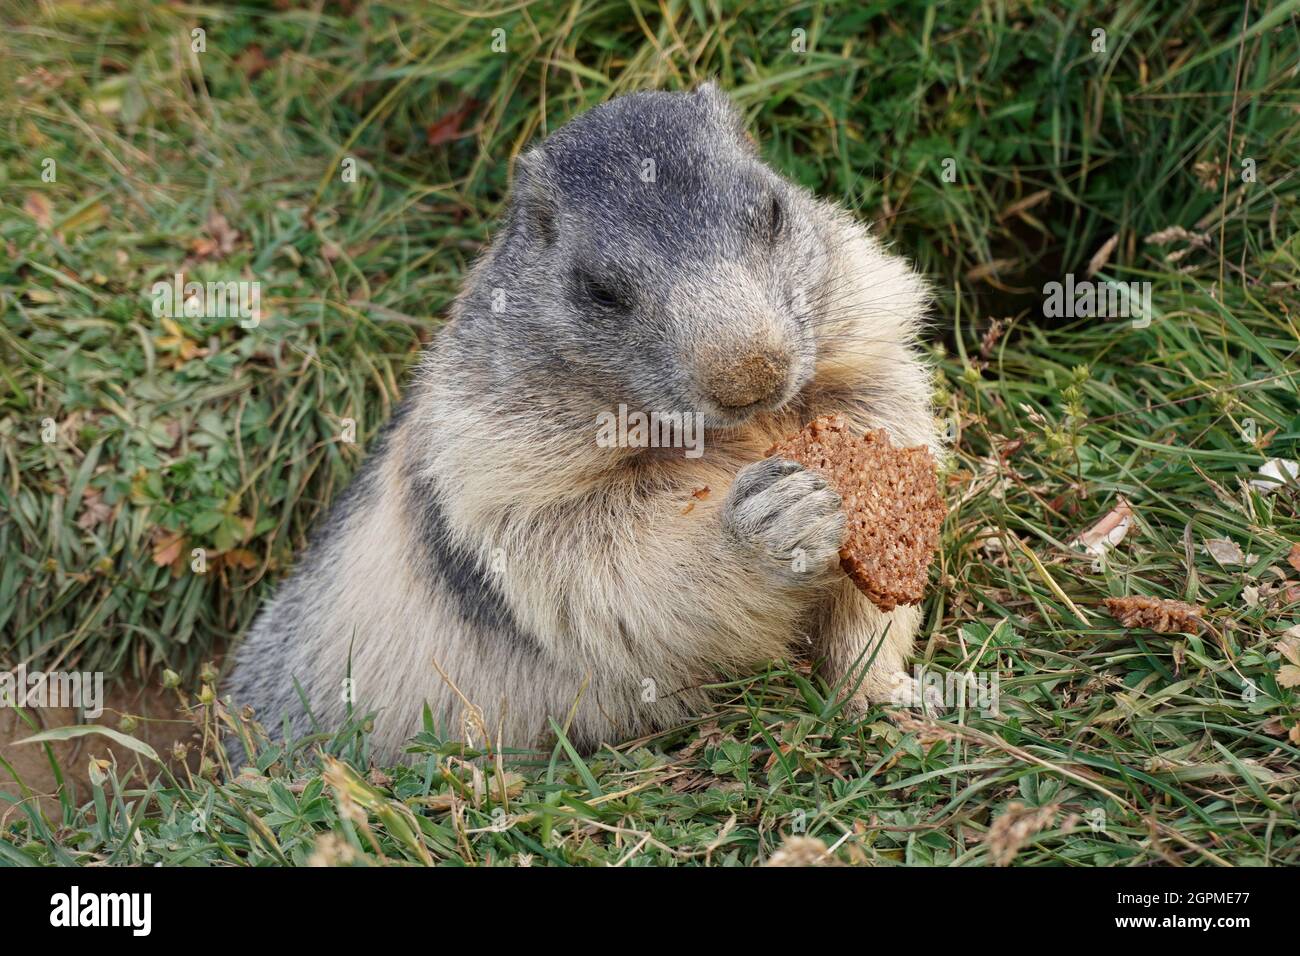 A trusting marmot eats bread, fed by tourists. Alpine marmot living in the wild. Stock Photo